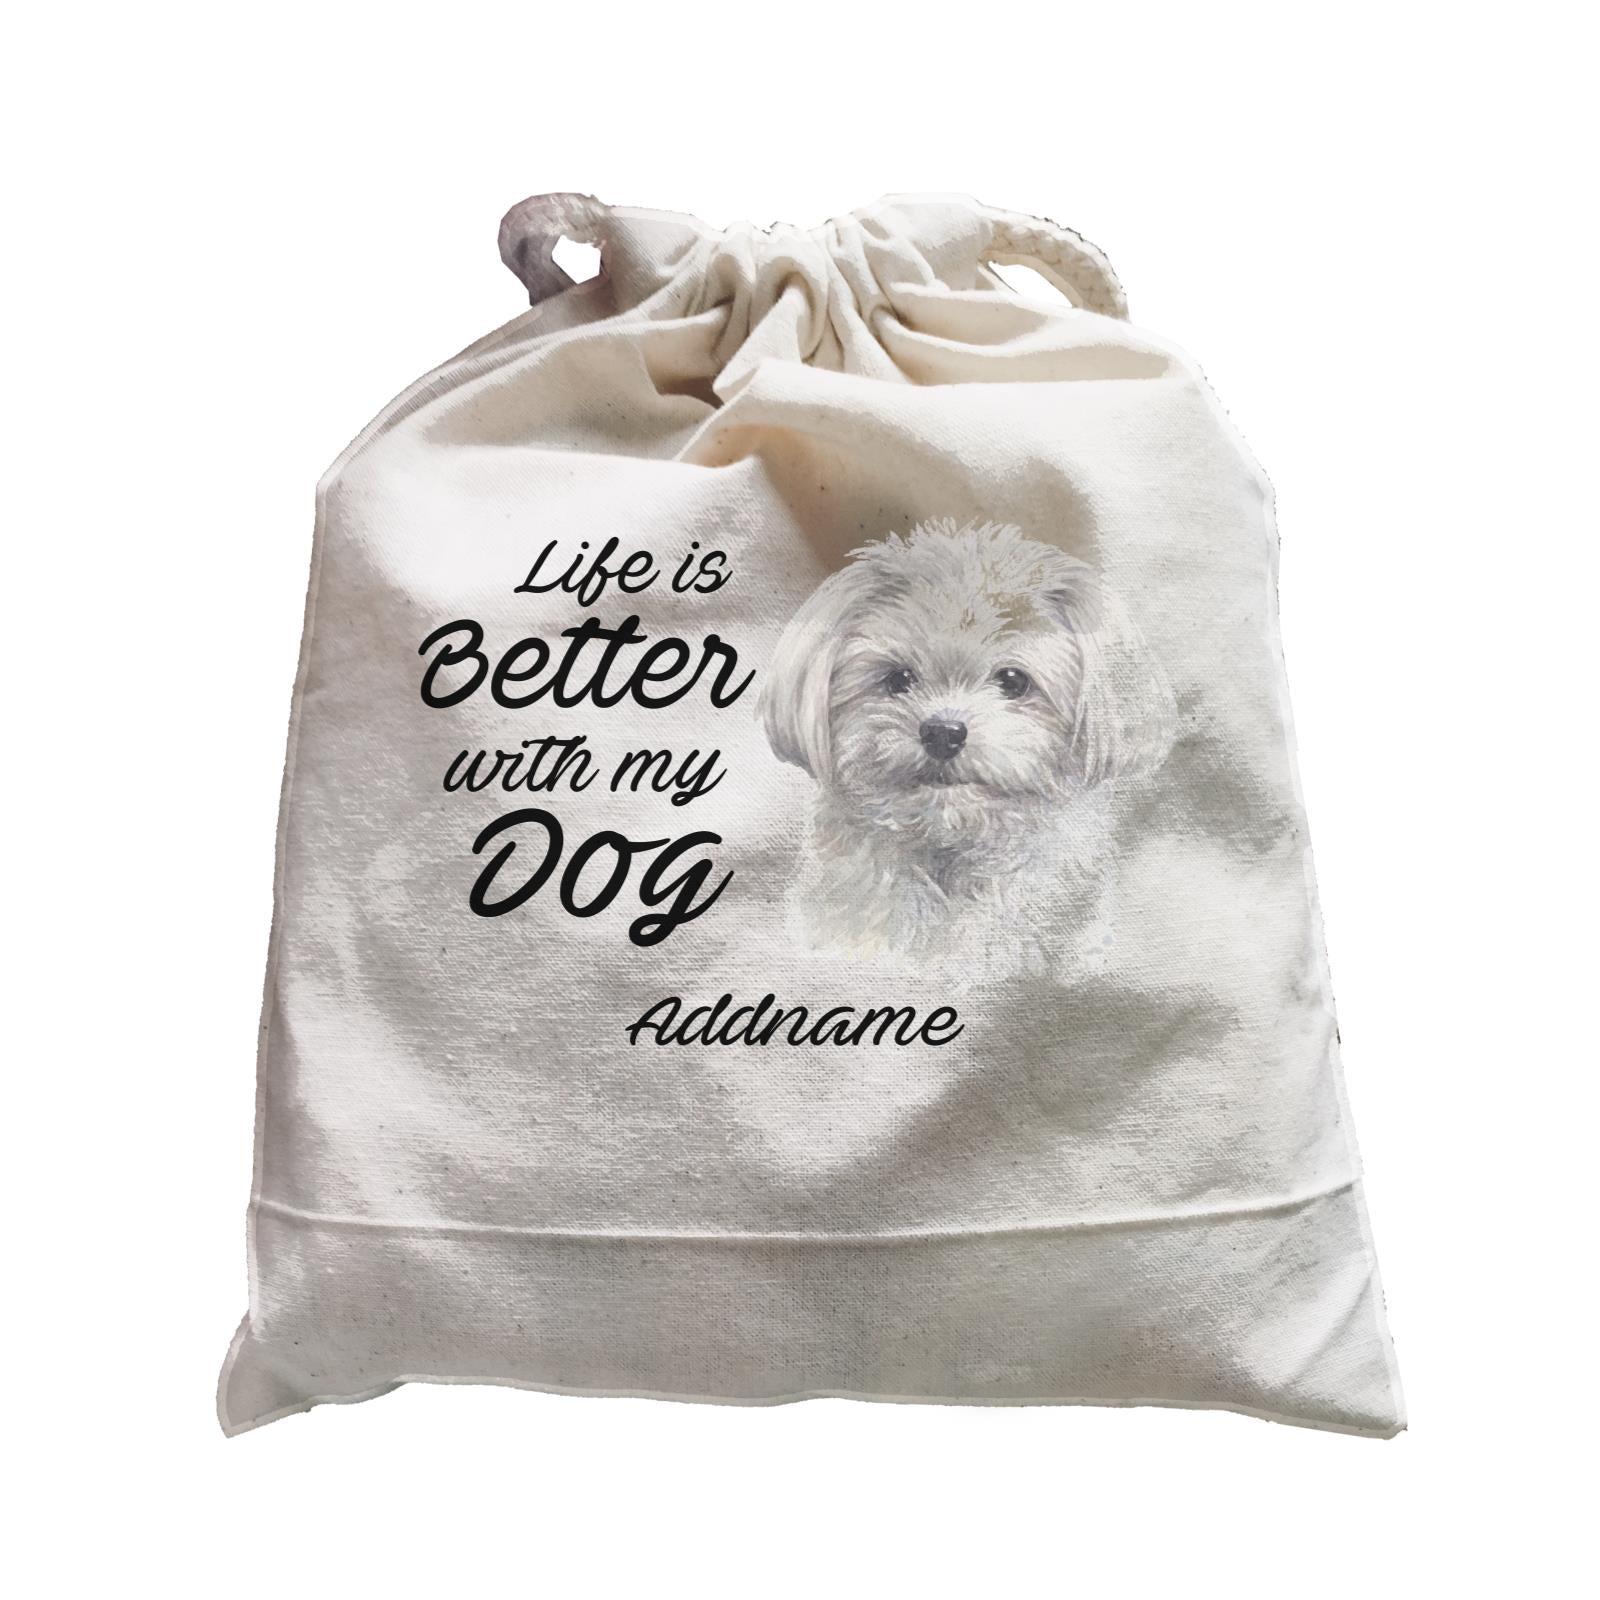 Watercolor Life is Better With My Dog Maltese White Addname Satchel